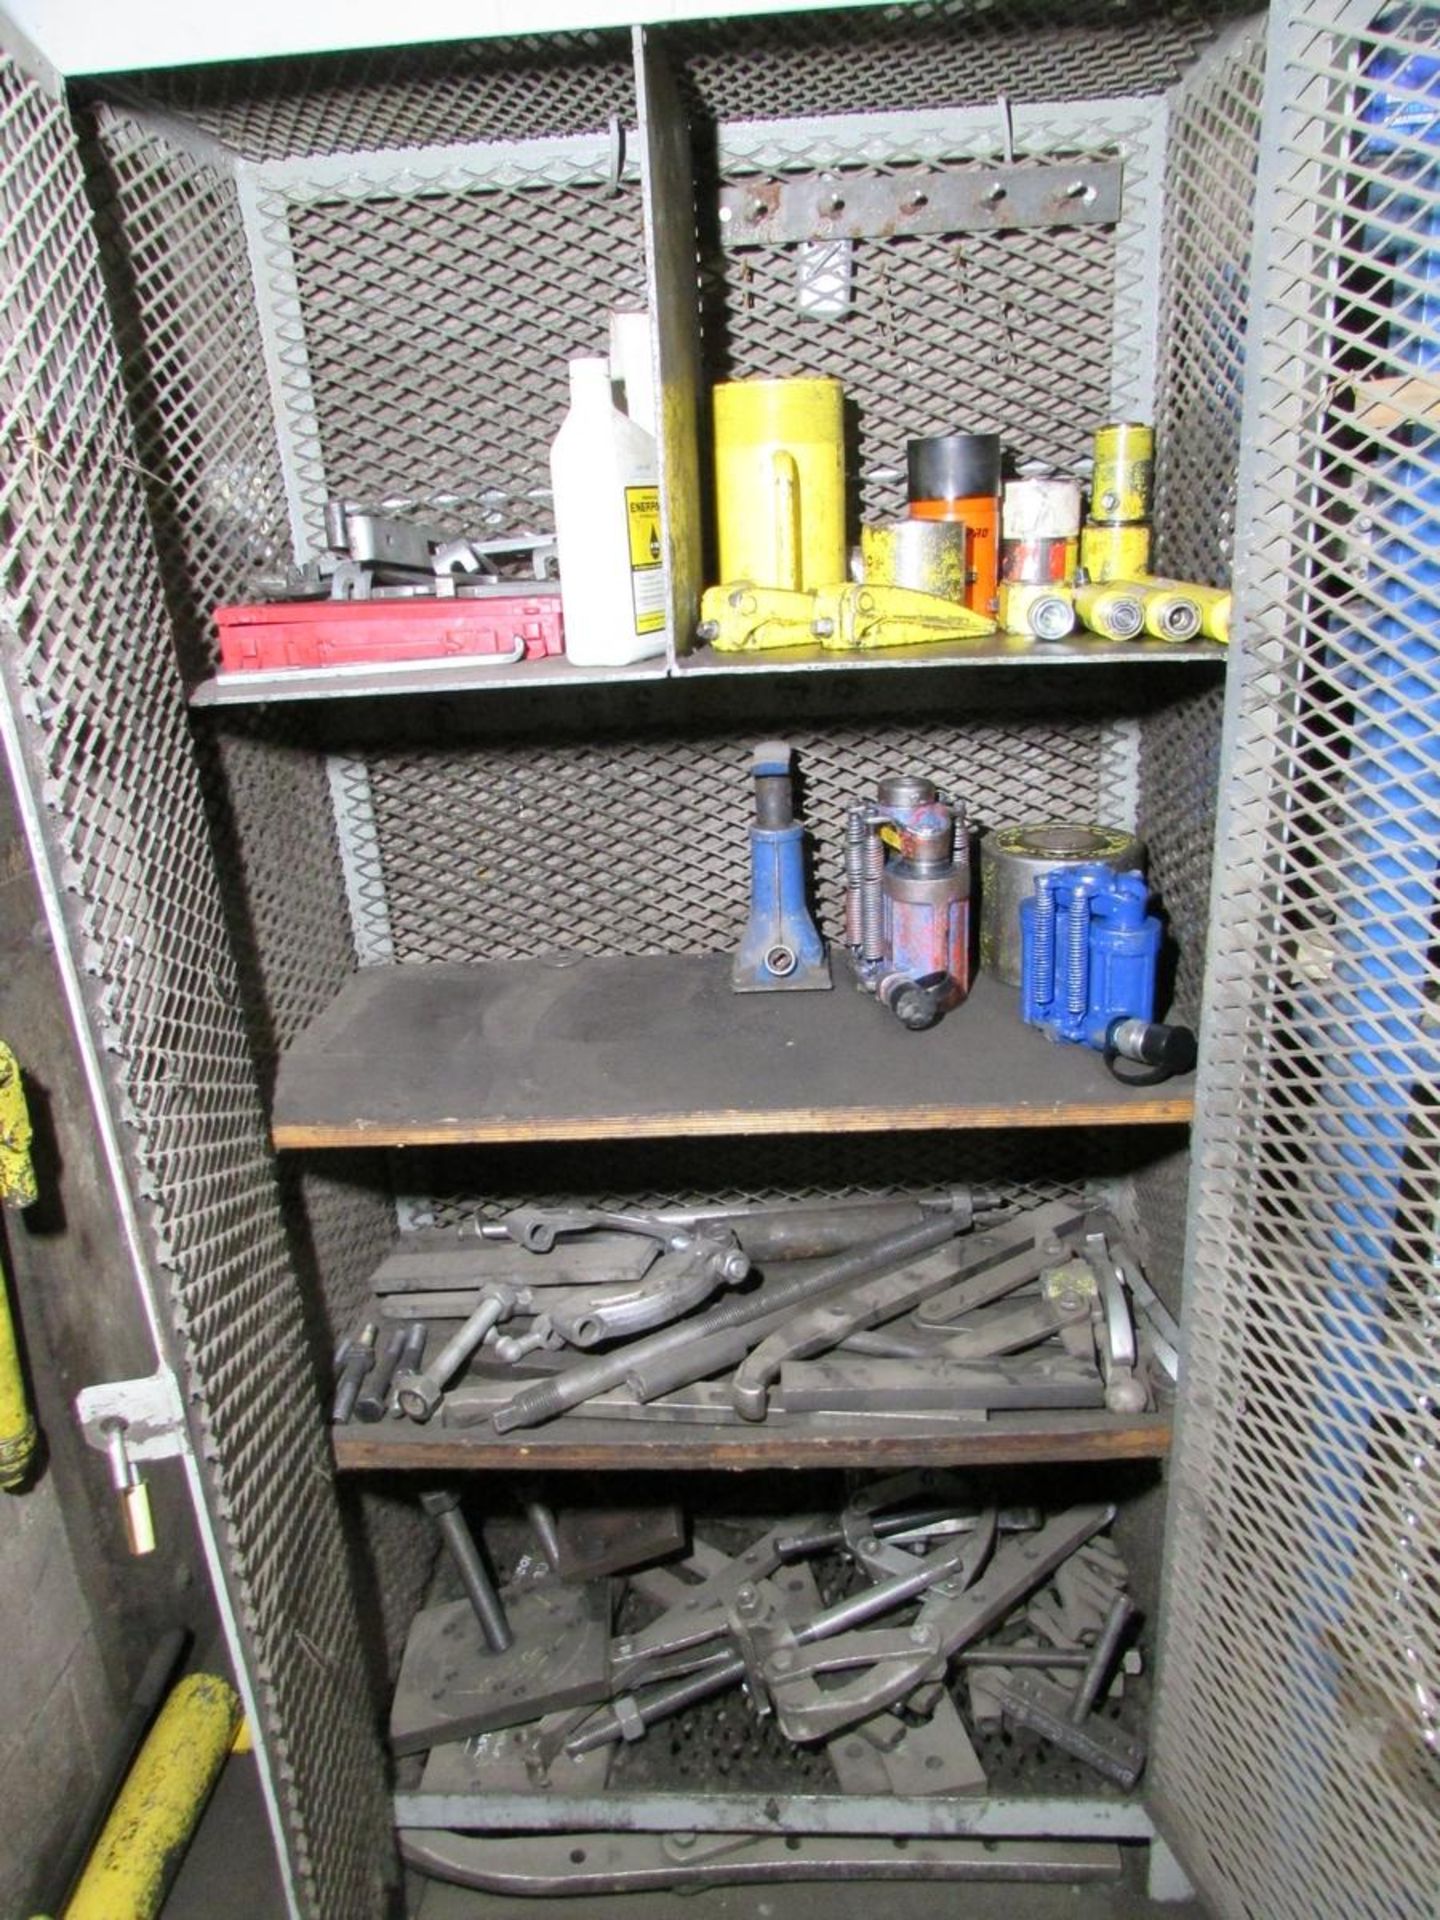 Storage Cage w/ (4) Enerpac Hyd. Pumps & Contents - Image 4 of 6